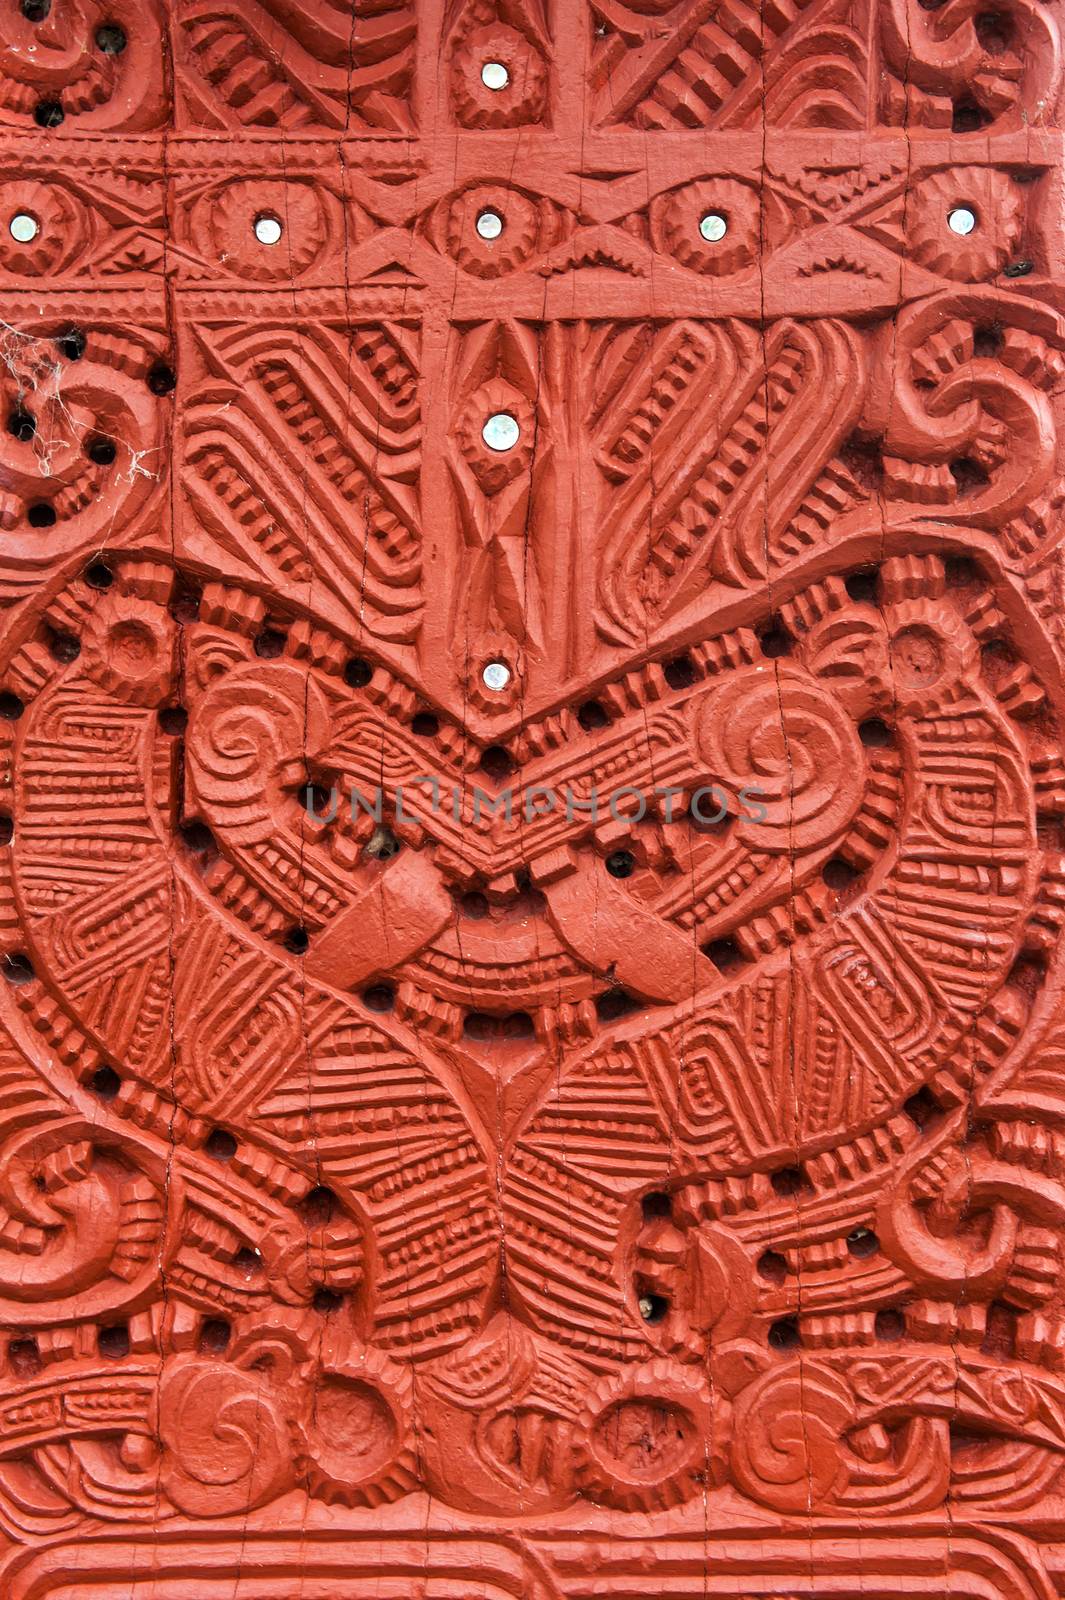 Maori Carving by fyletto